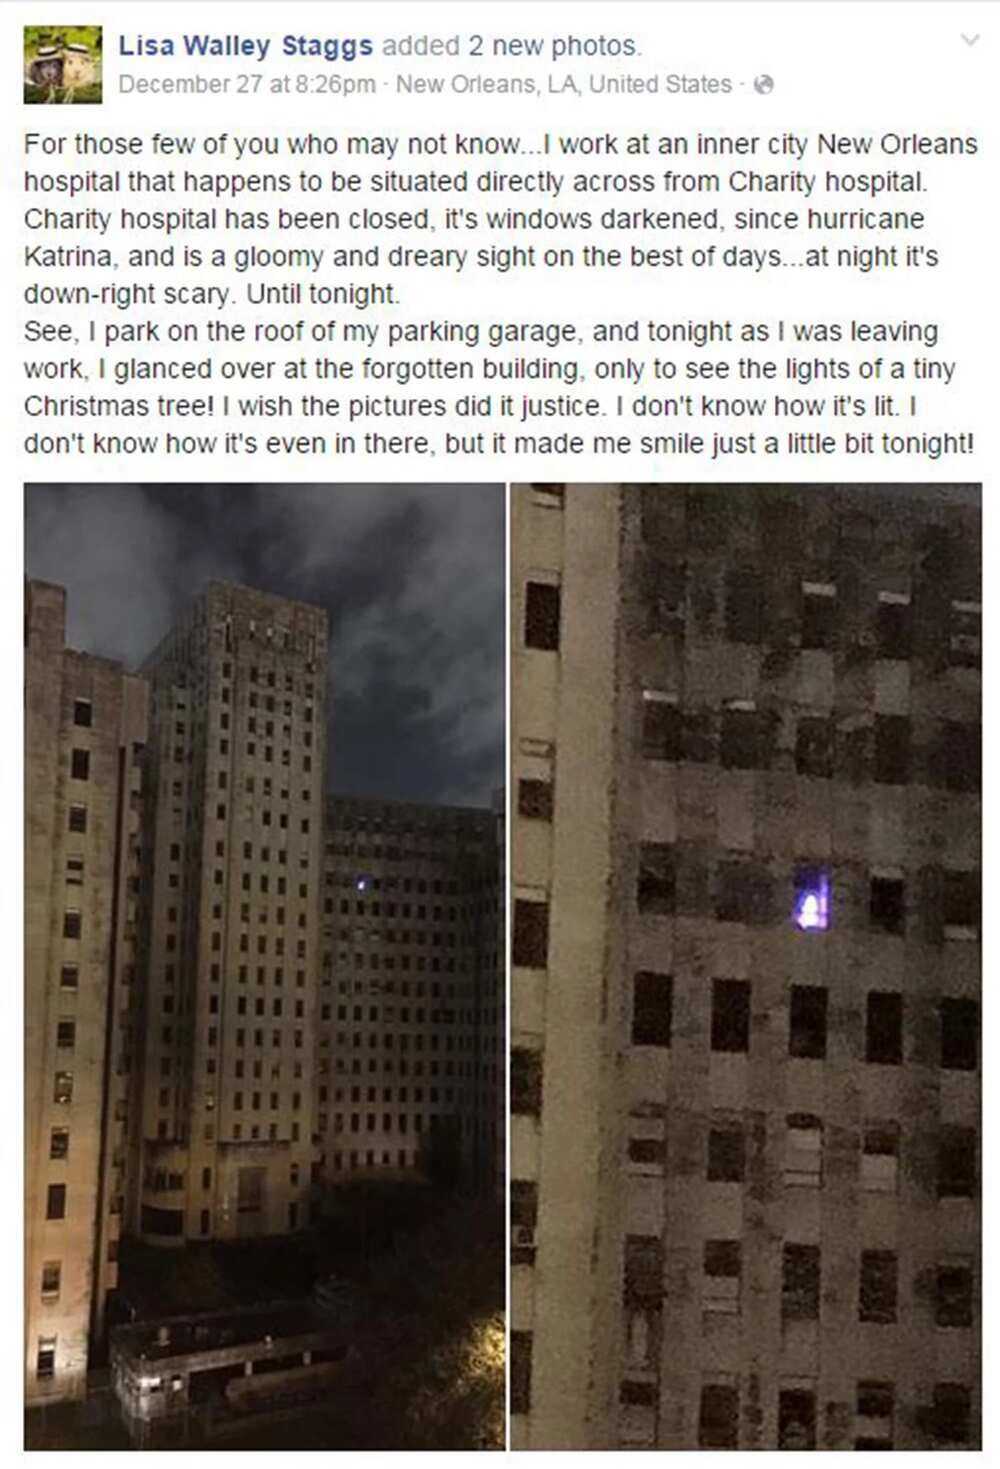 A nurse caught a picture of a ghost in an abandoned hospital!